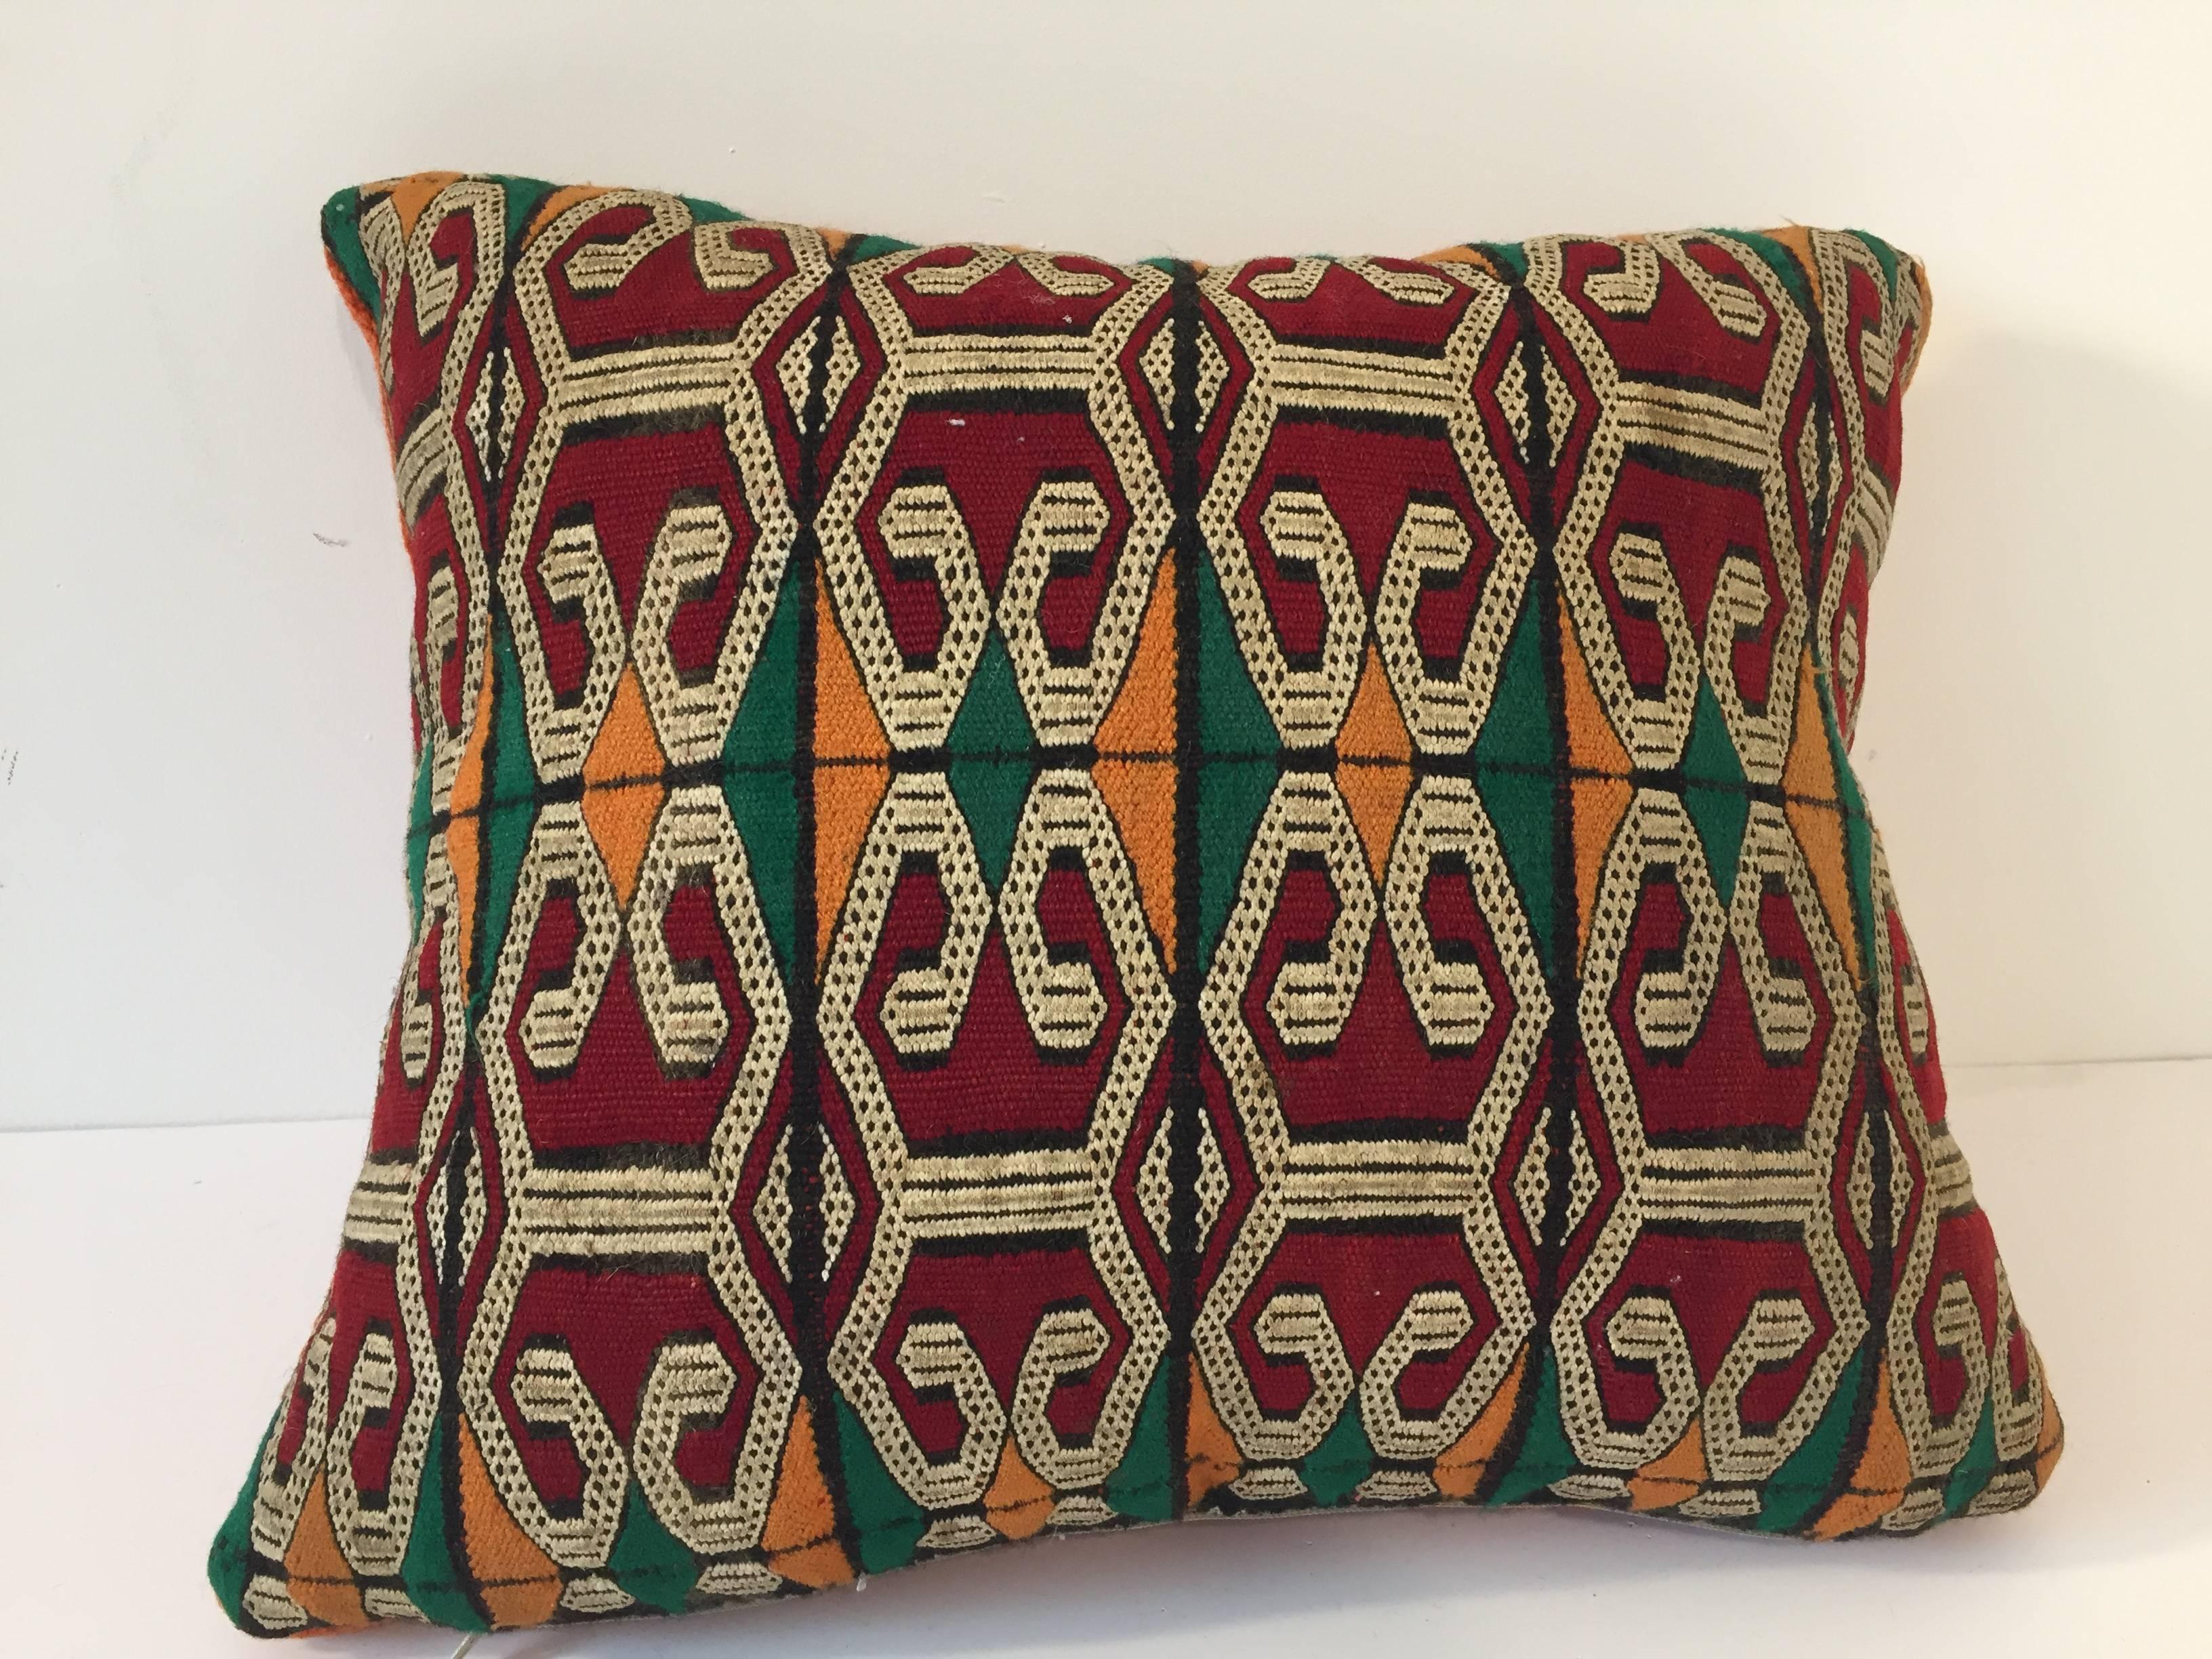 Moroccan Berber handwoven tribal throw pillow made from a vintage flat-weave rug.
The front and the back are made from a different rug, front is more elaborate and back is more plain.
Geometric African tribal designs in red, white and black and